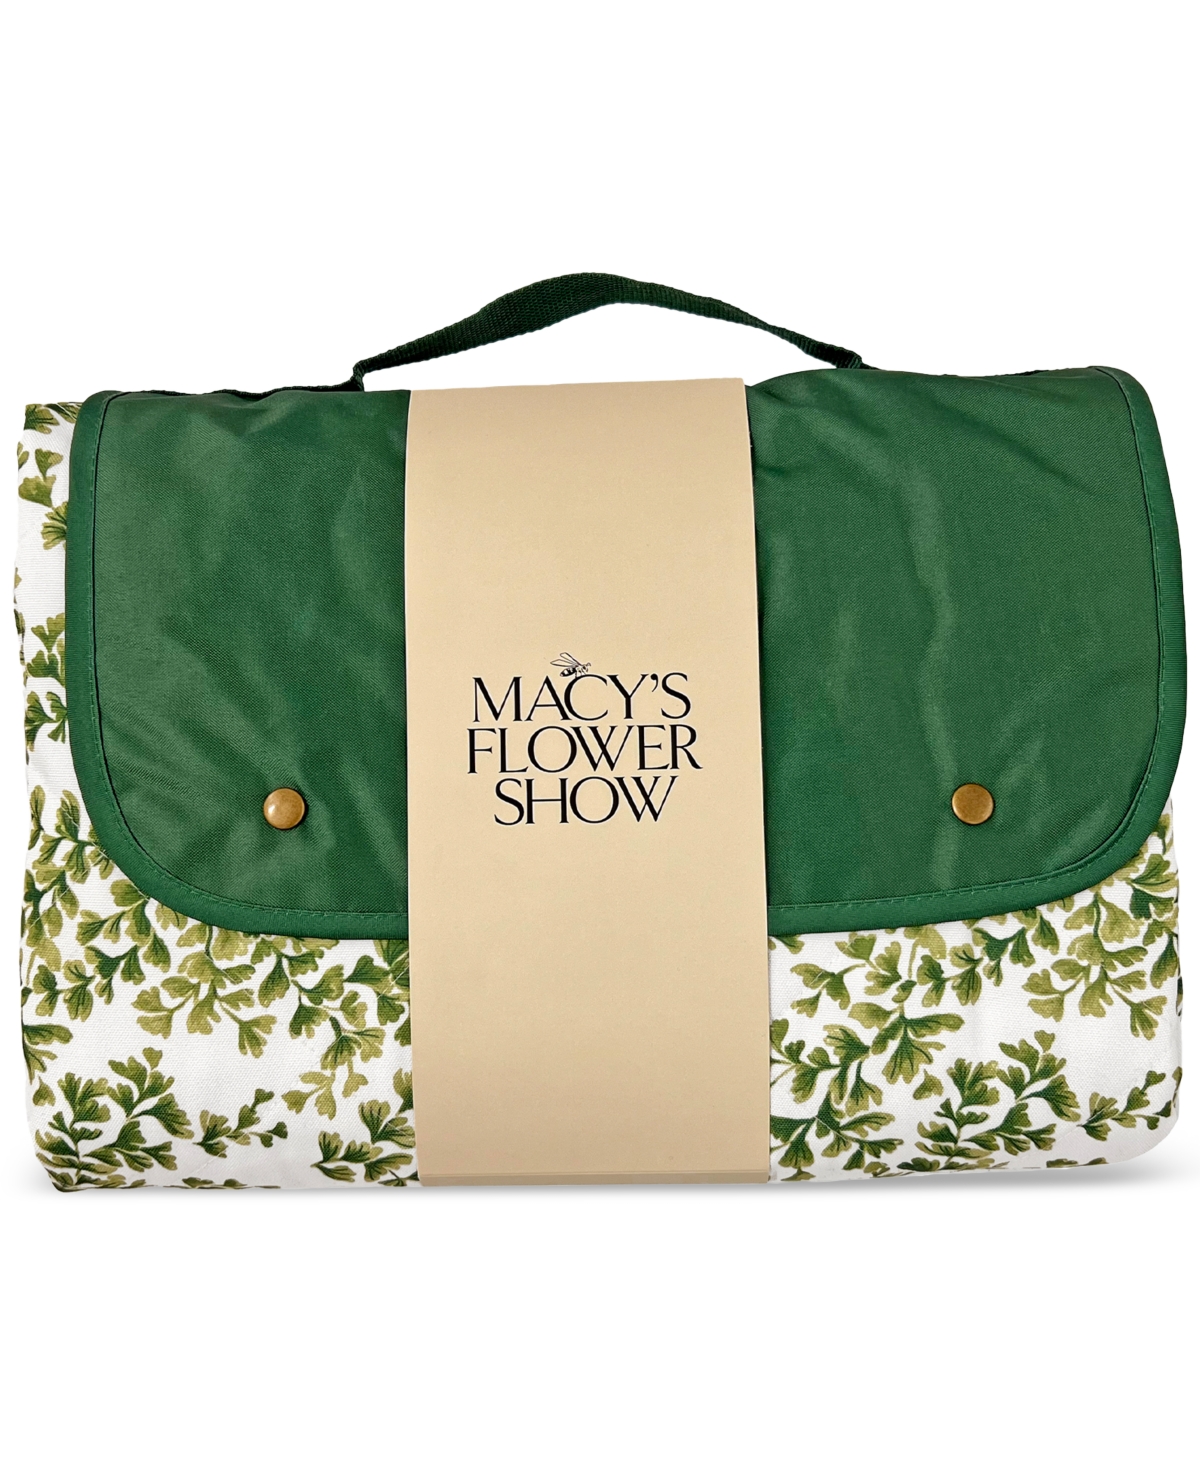 Flower Show Picnic Blanket with Carrying Pouch Set, 60" x 70", Created for Macy's - Green Leaf